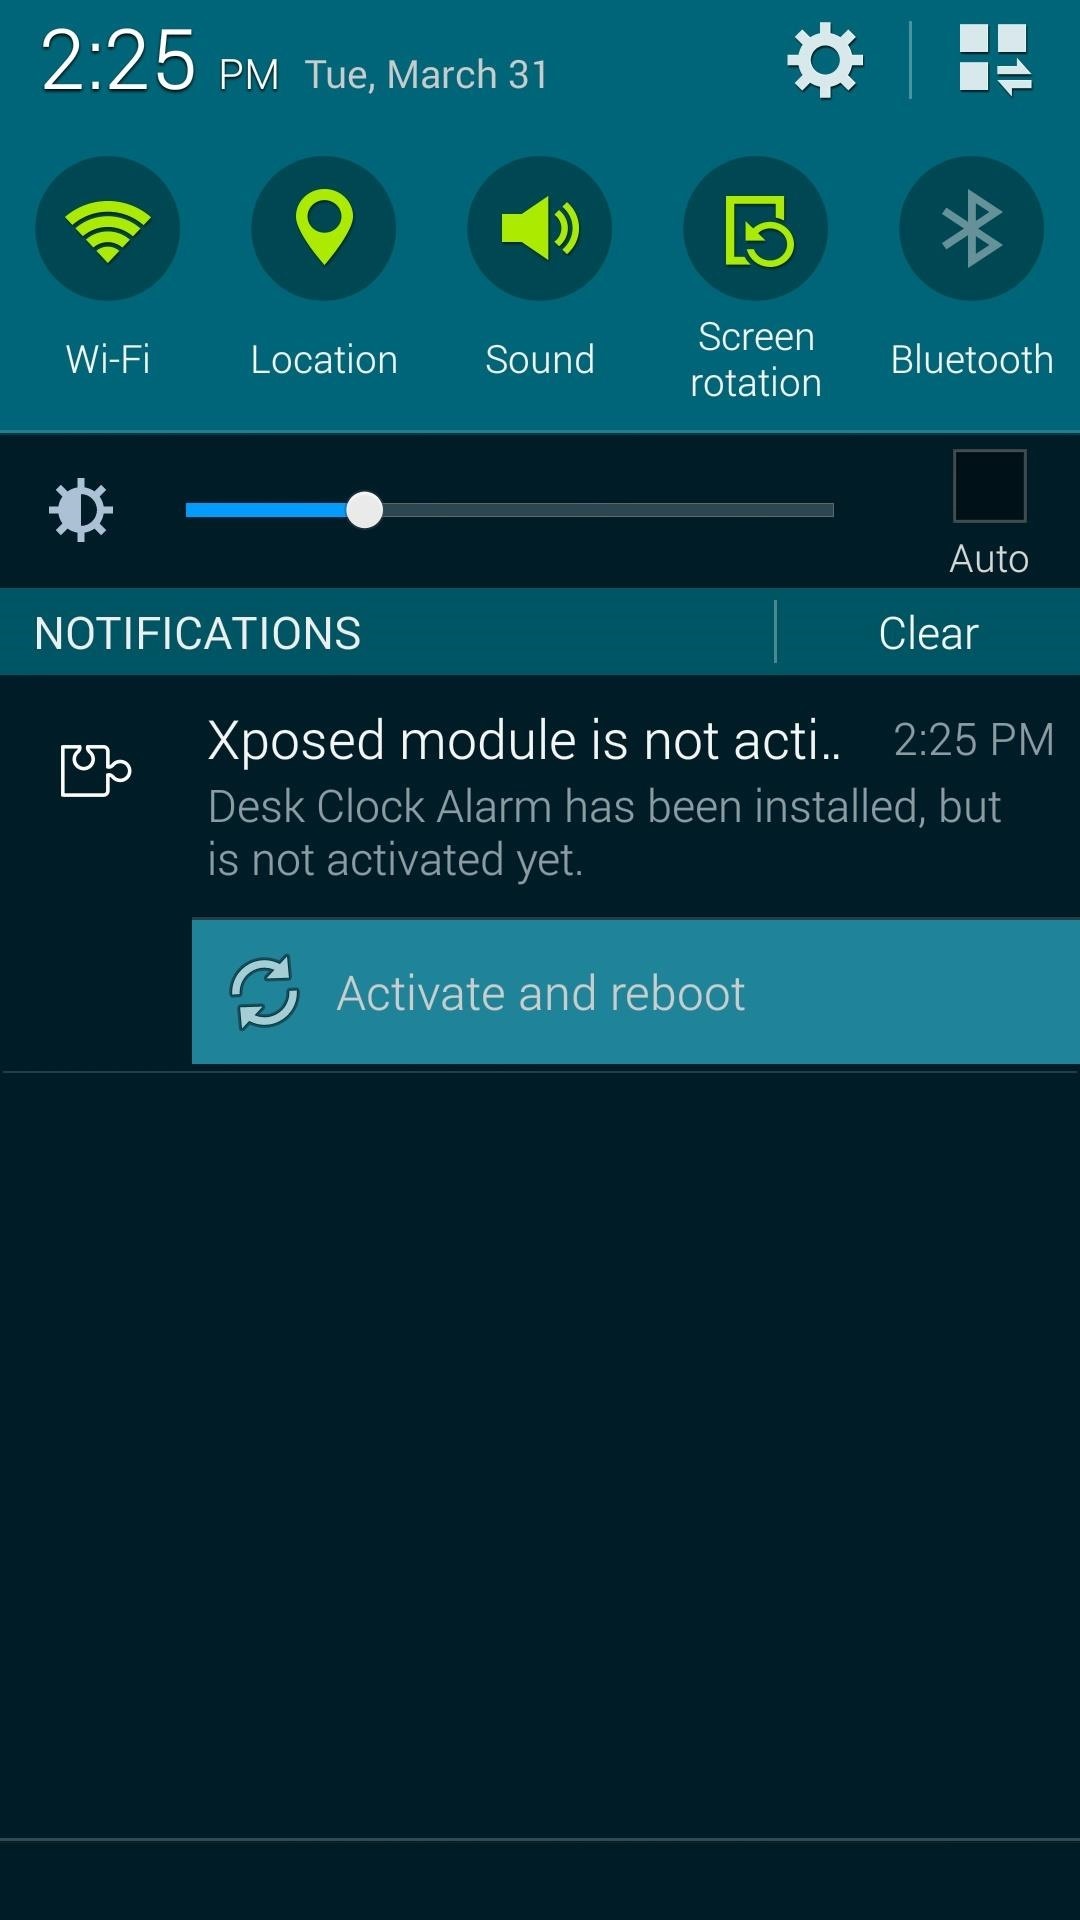 How to Make Android's Clock App Open Directly to the Alarm Tab